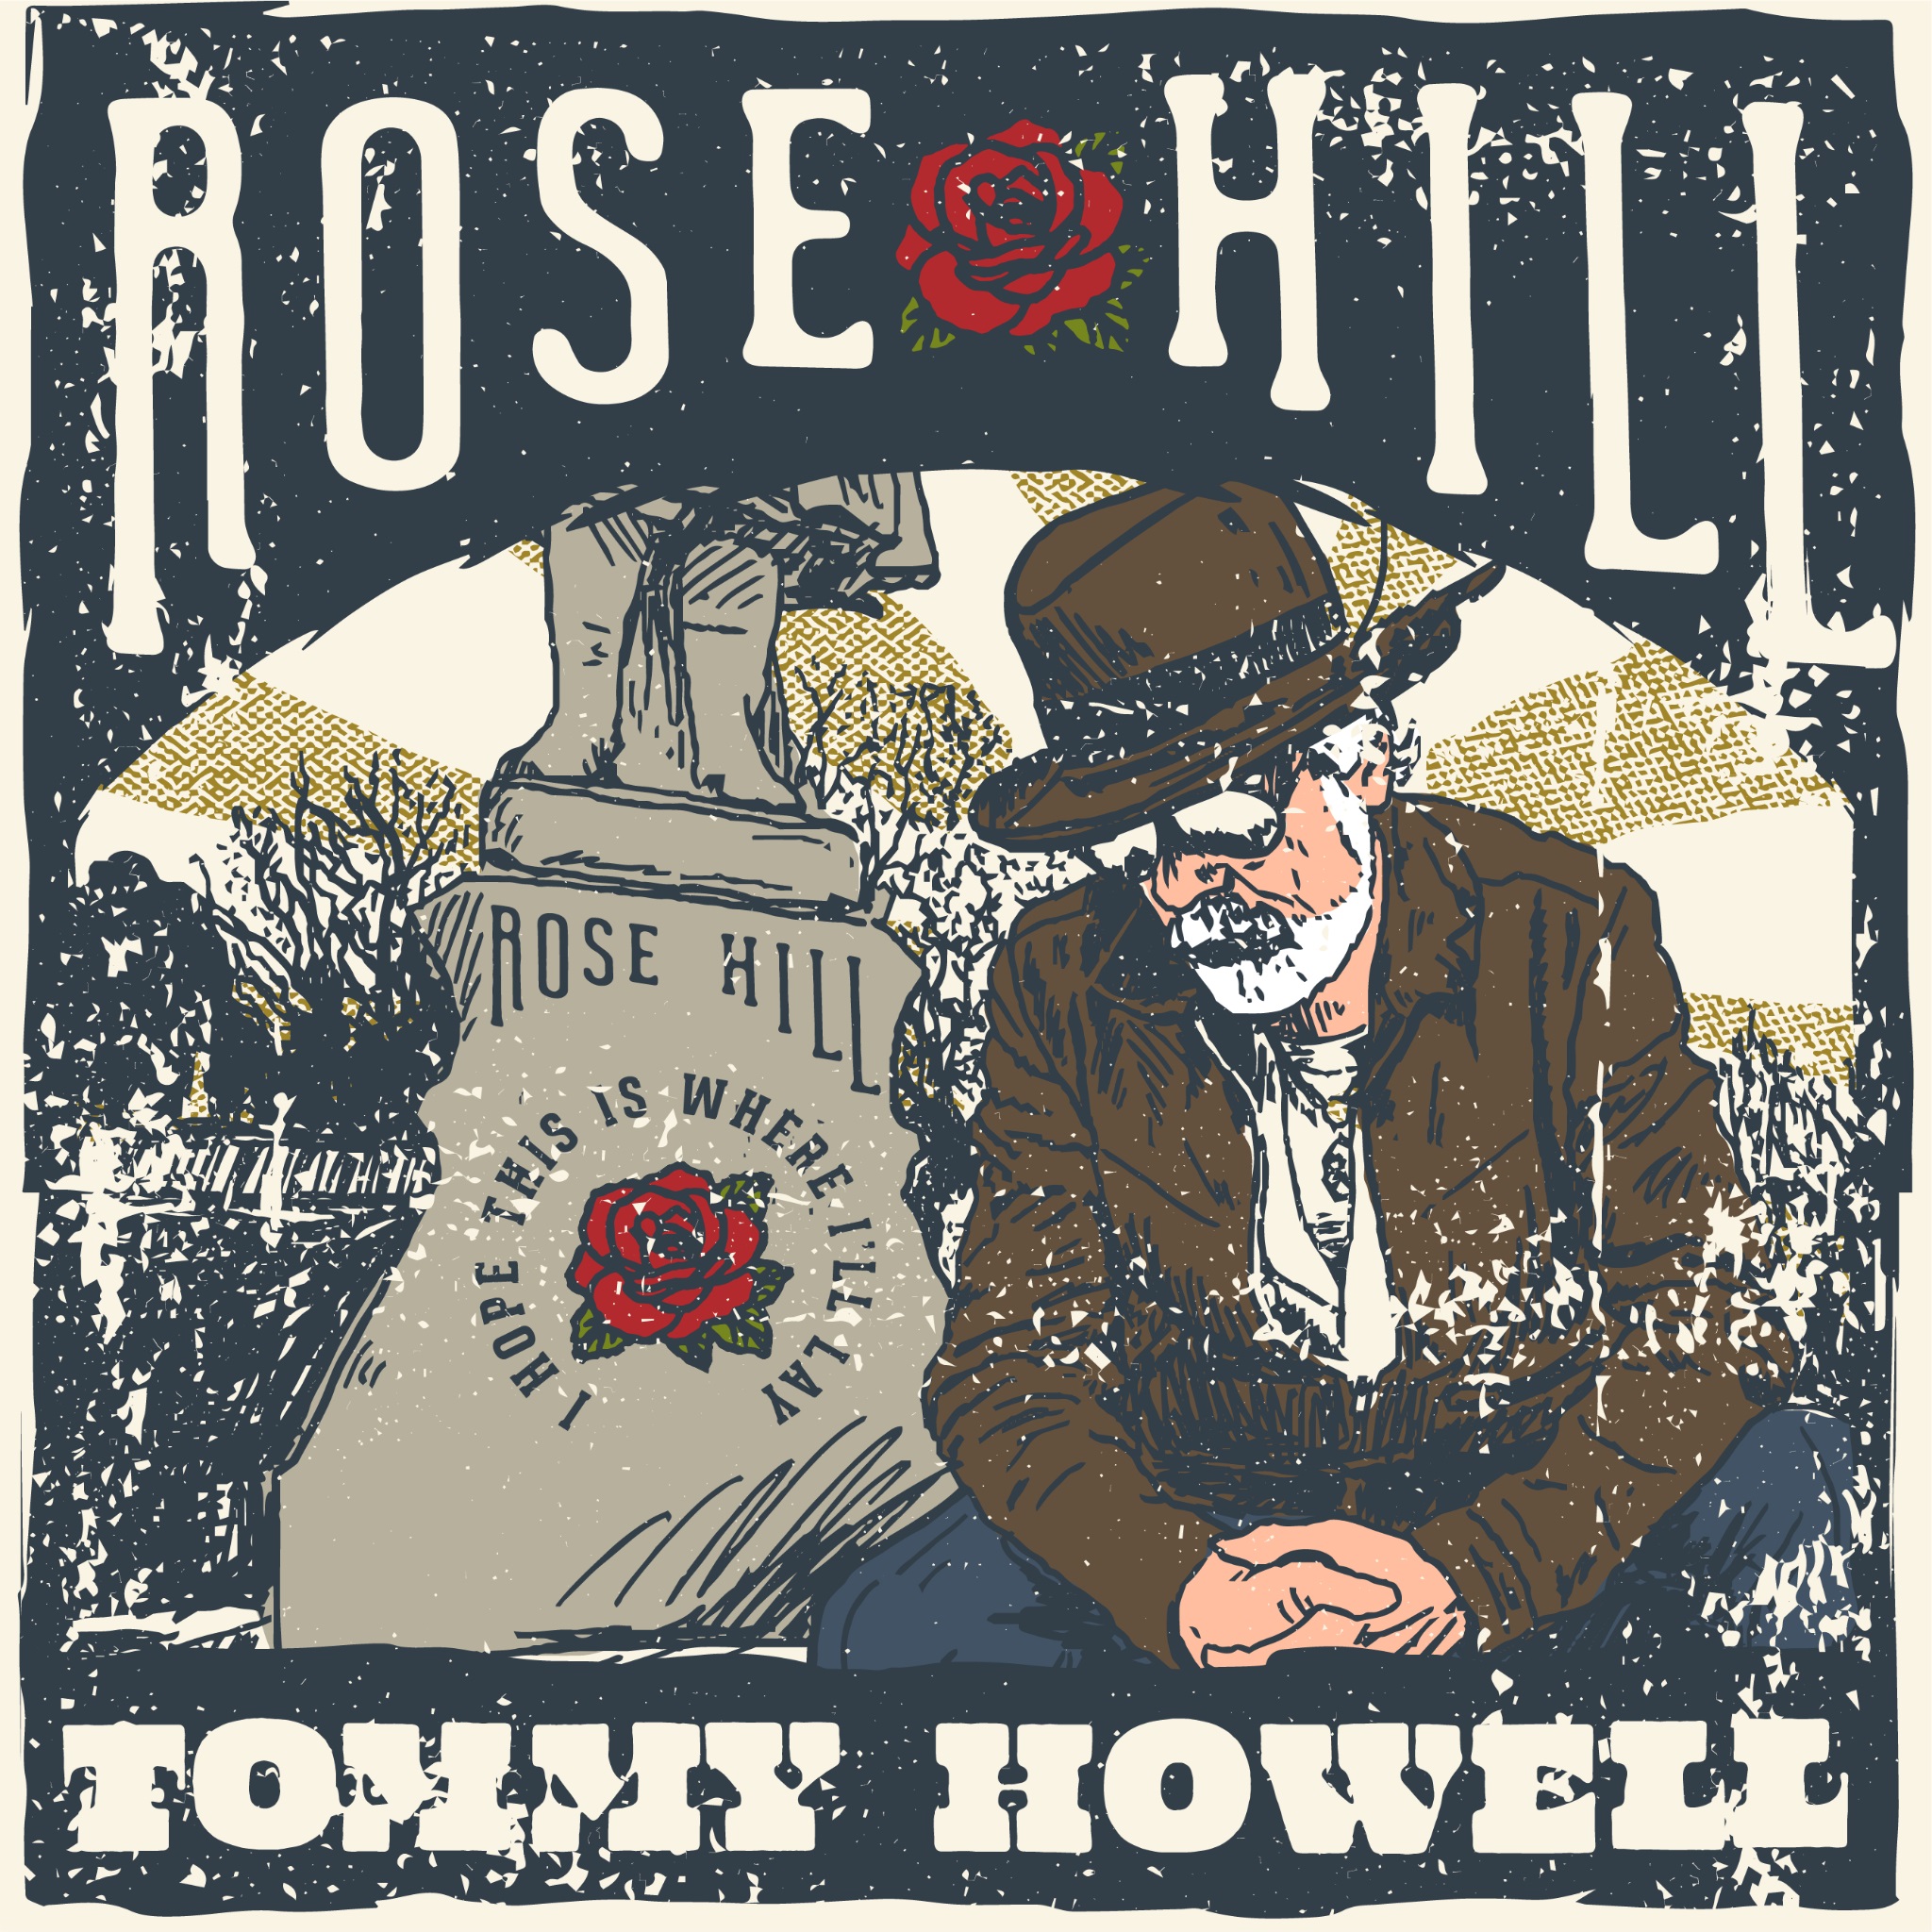 Actor Tommy (C. Thomas) Howell Makes His Musical Debut  with Single “Rose Hill”